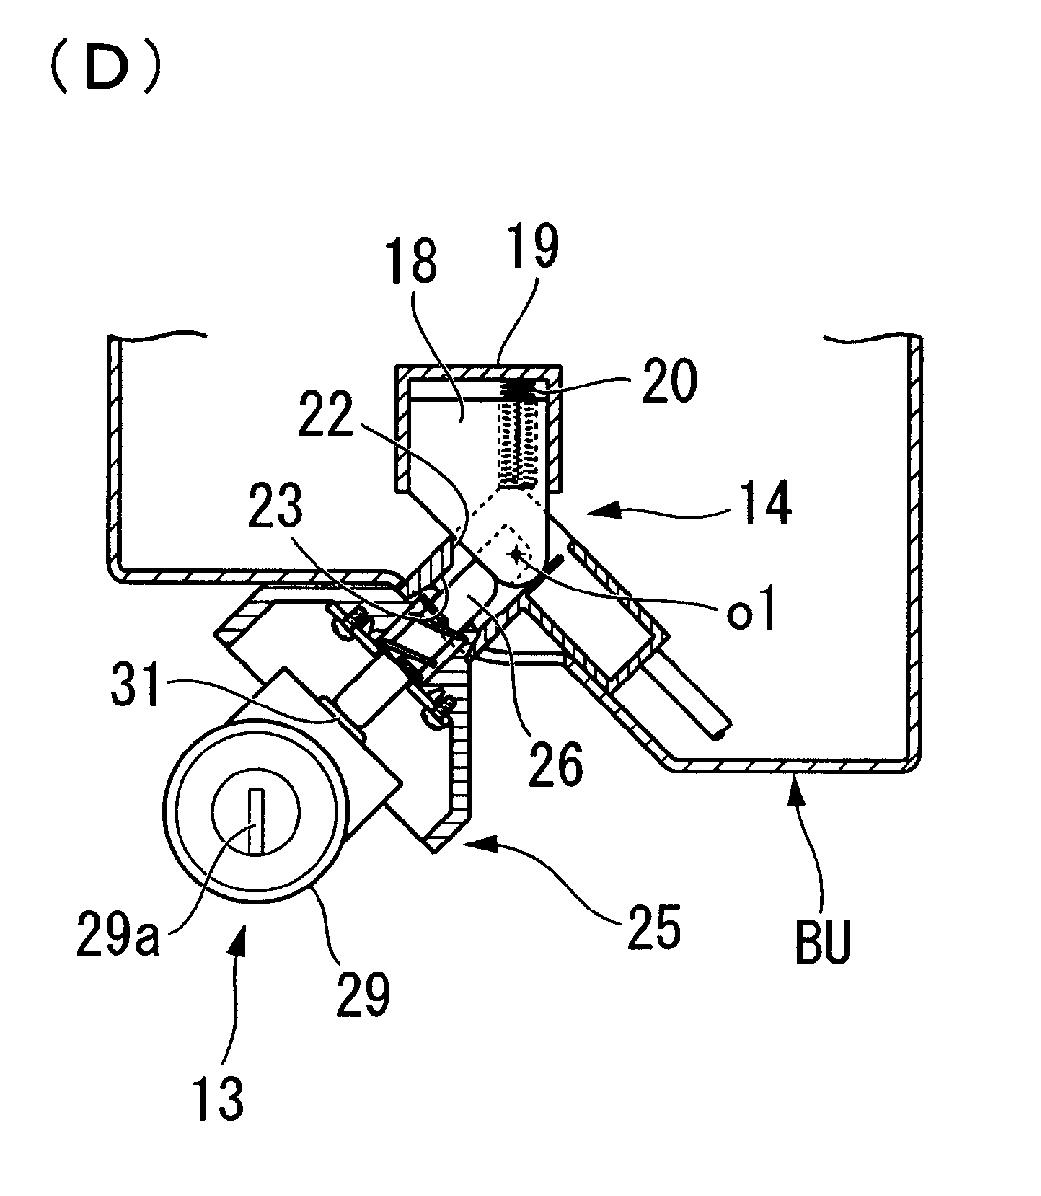 Battery unit connection structure of electric vehicle